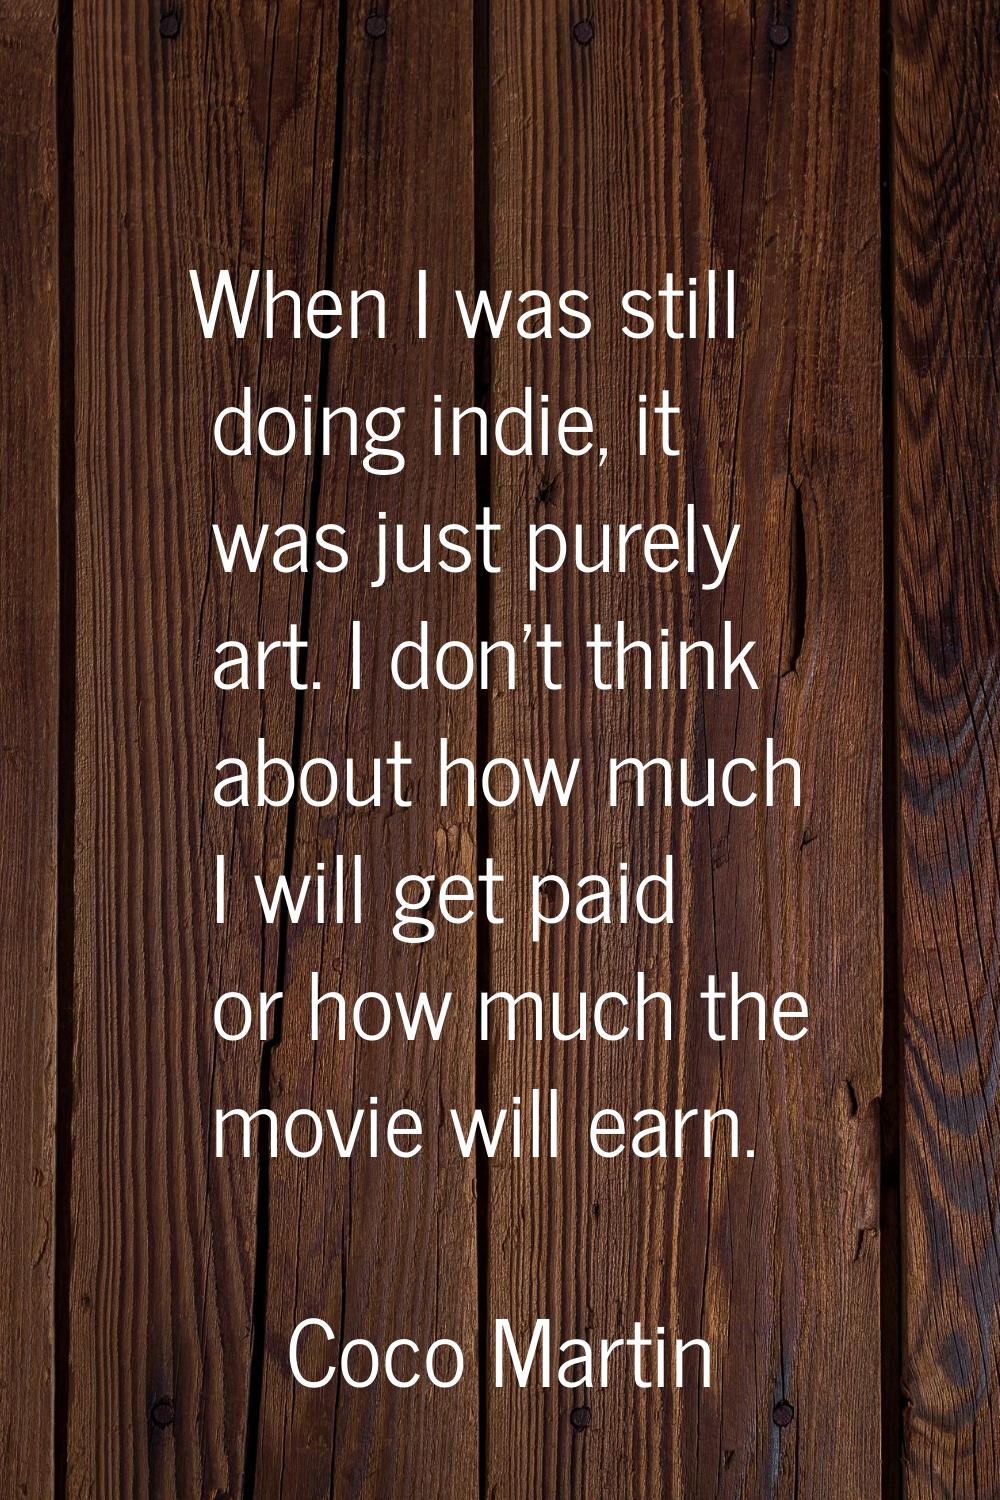 When I was still doing indie, it was just purely art. I don't think about how much I will get paid 